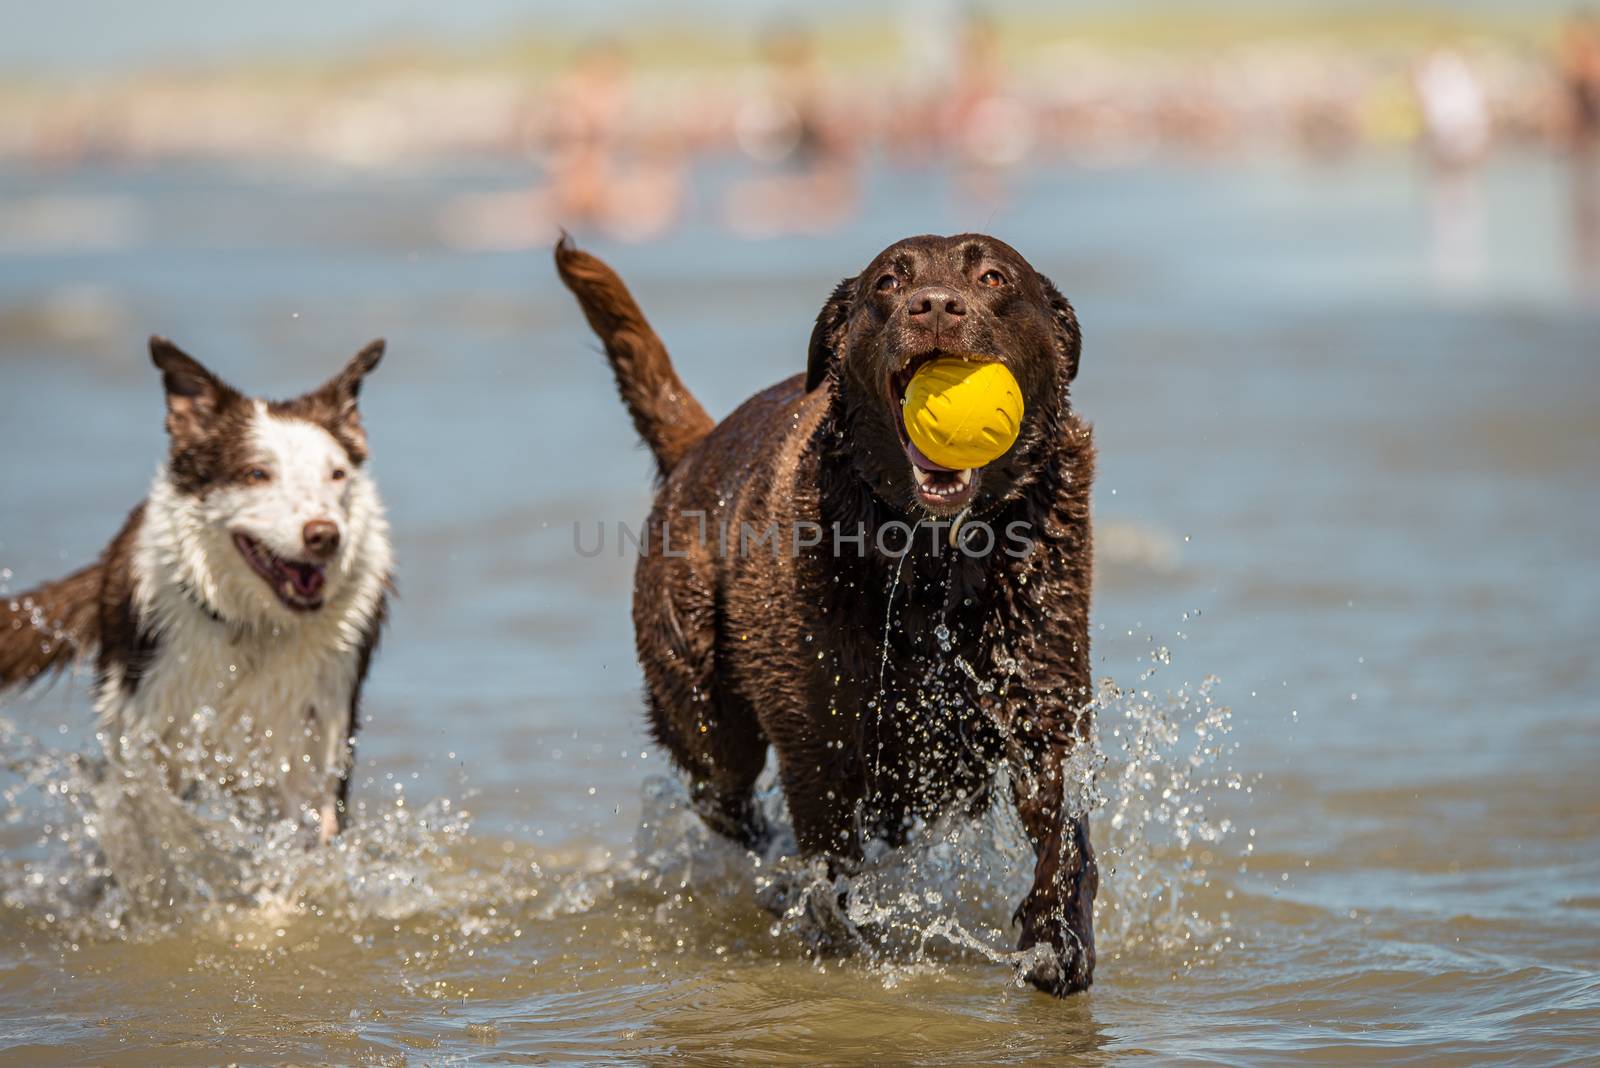 Border collie and chocolate labrador running in the ocean surf.